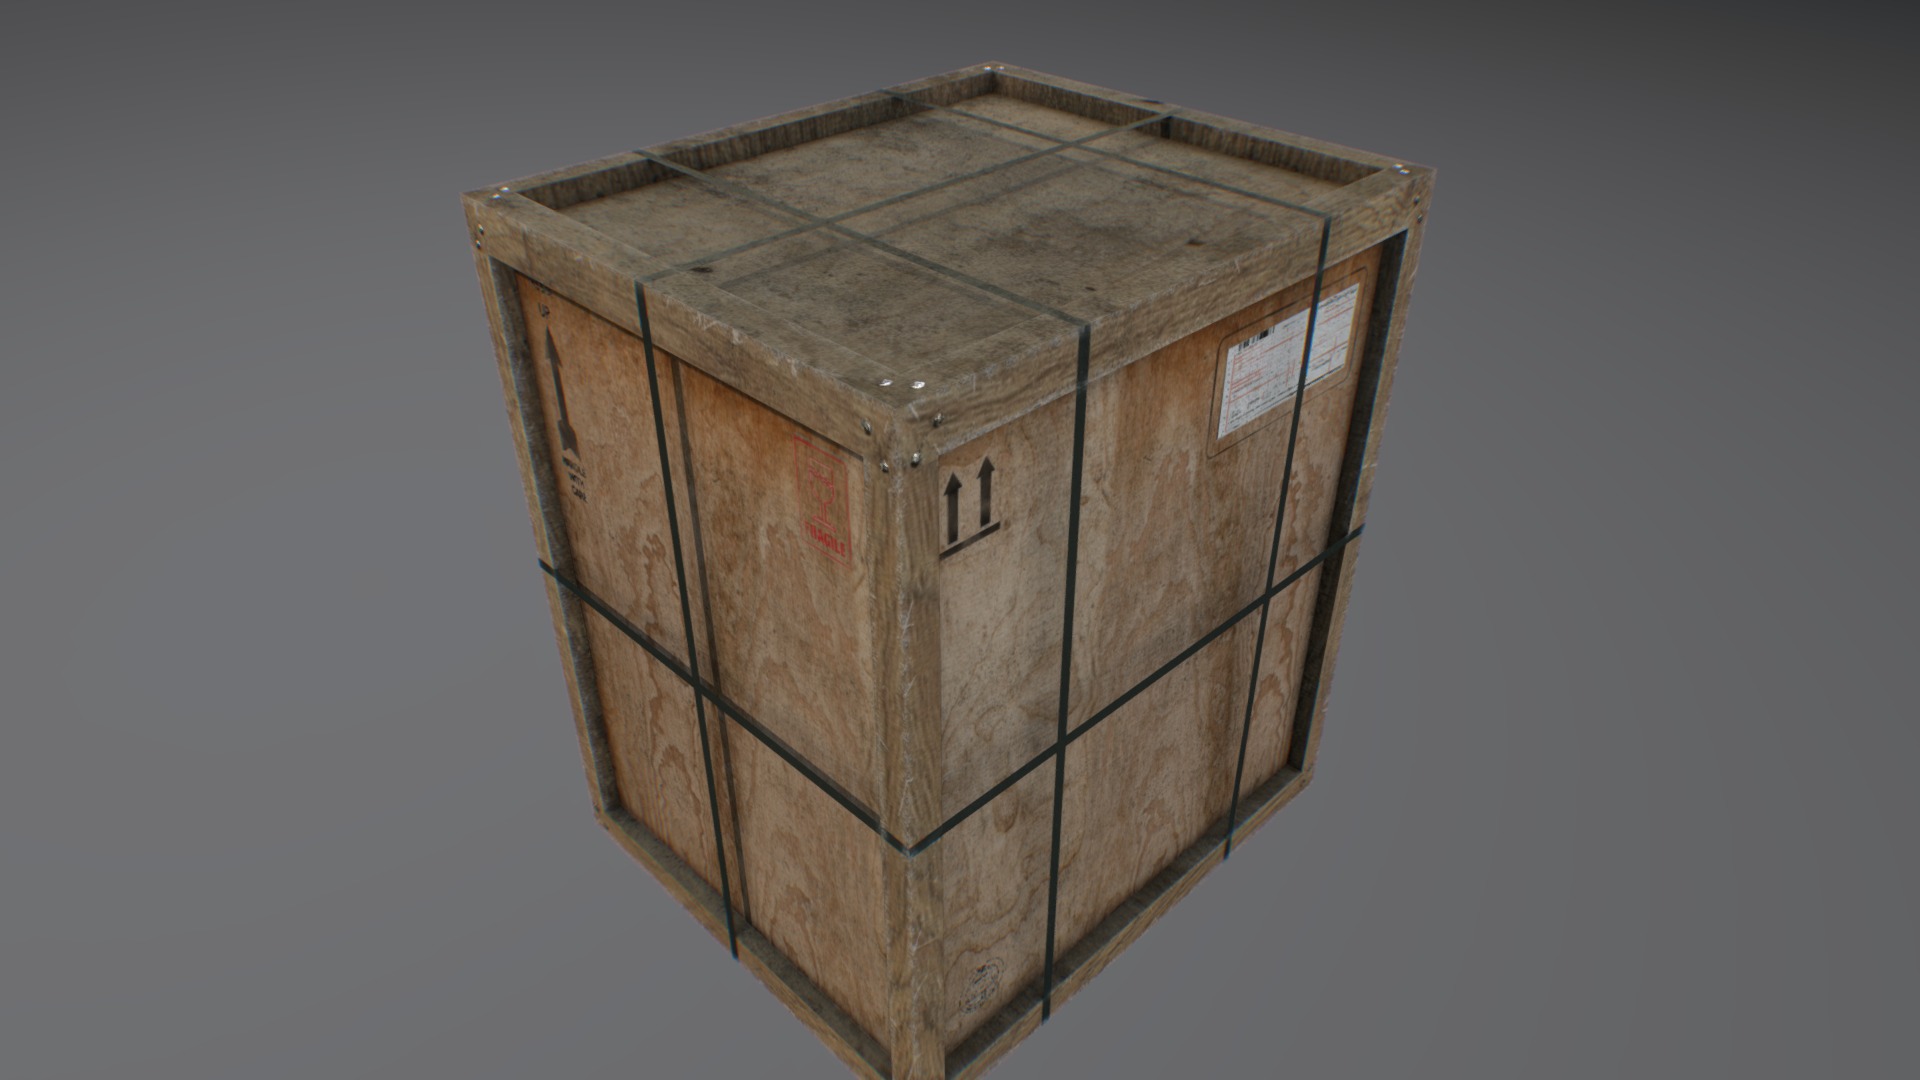 3D model Old wooden cargo crate 9 - This is a 3D model of the Old wooden cargo crate 9. The 3D model is about a wooden box with a window.